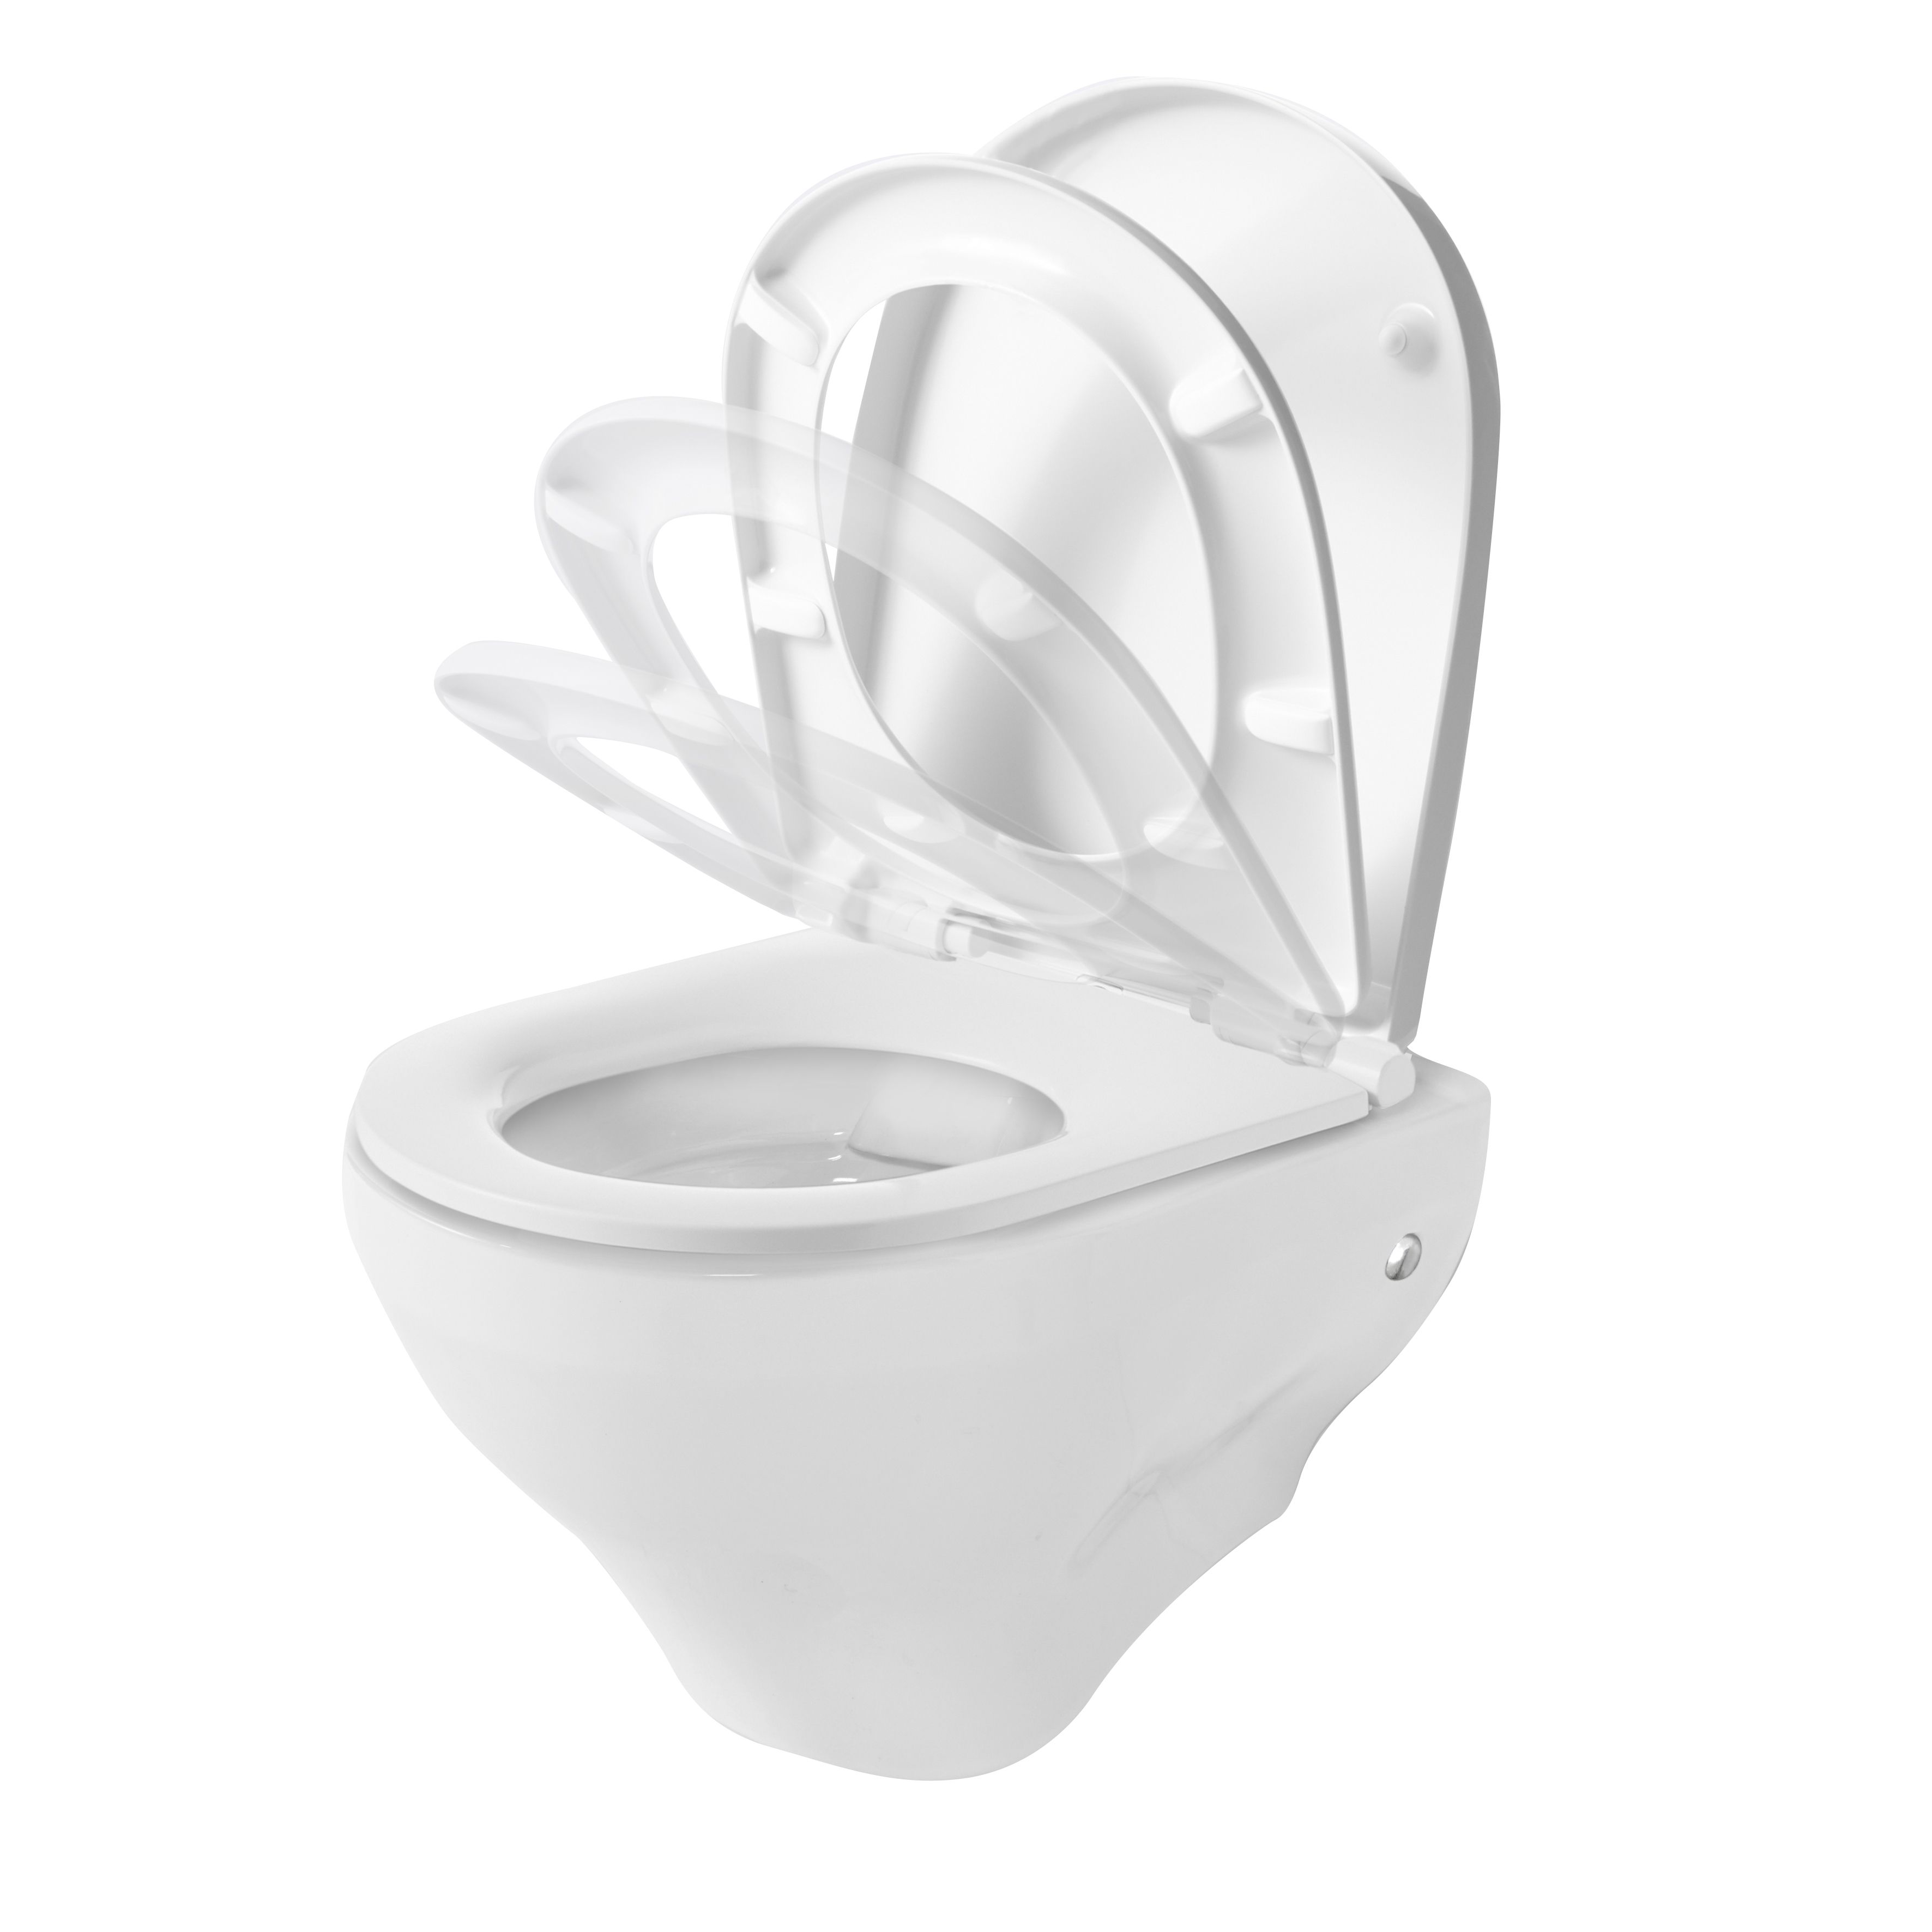 GoodHome Cavally White Rimless Back to wall Round Toilet pan with Soft close seat